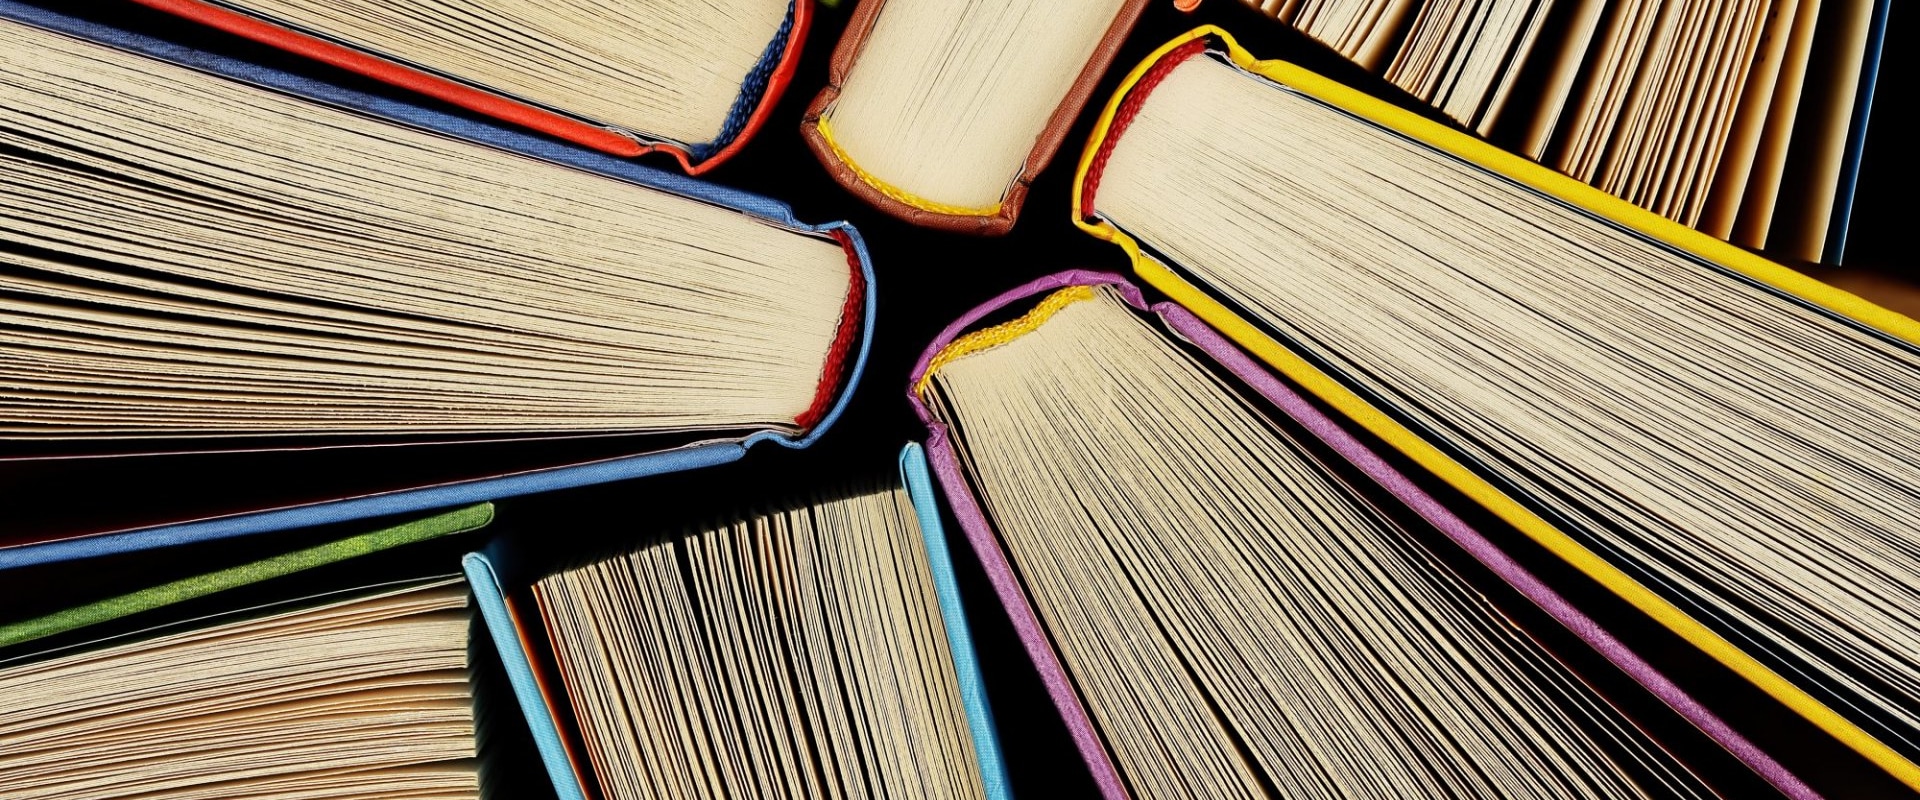 The Best Entrepreneurship Books Recommended By Experts